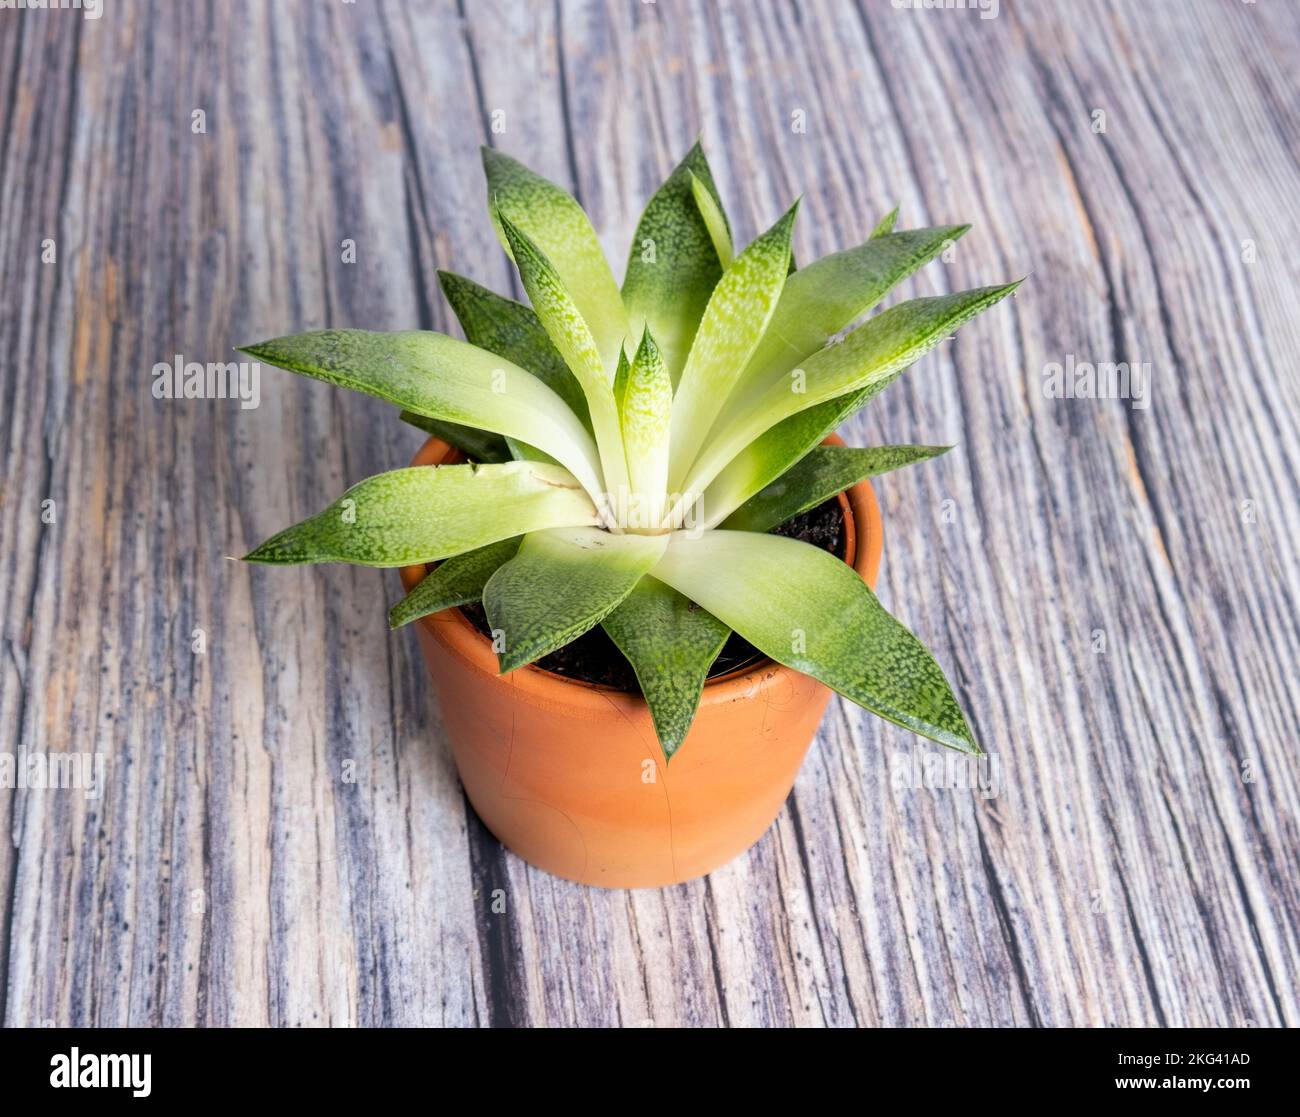 Cactus in a vase isolated on wood Stock Photo